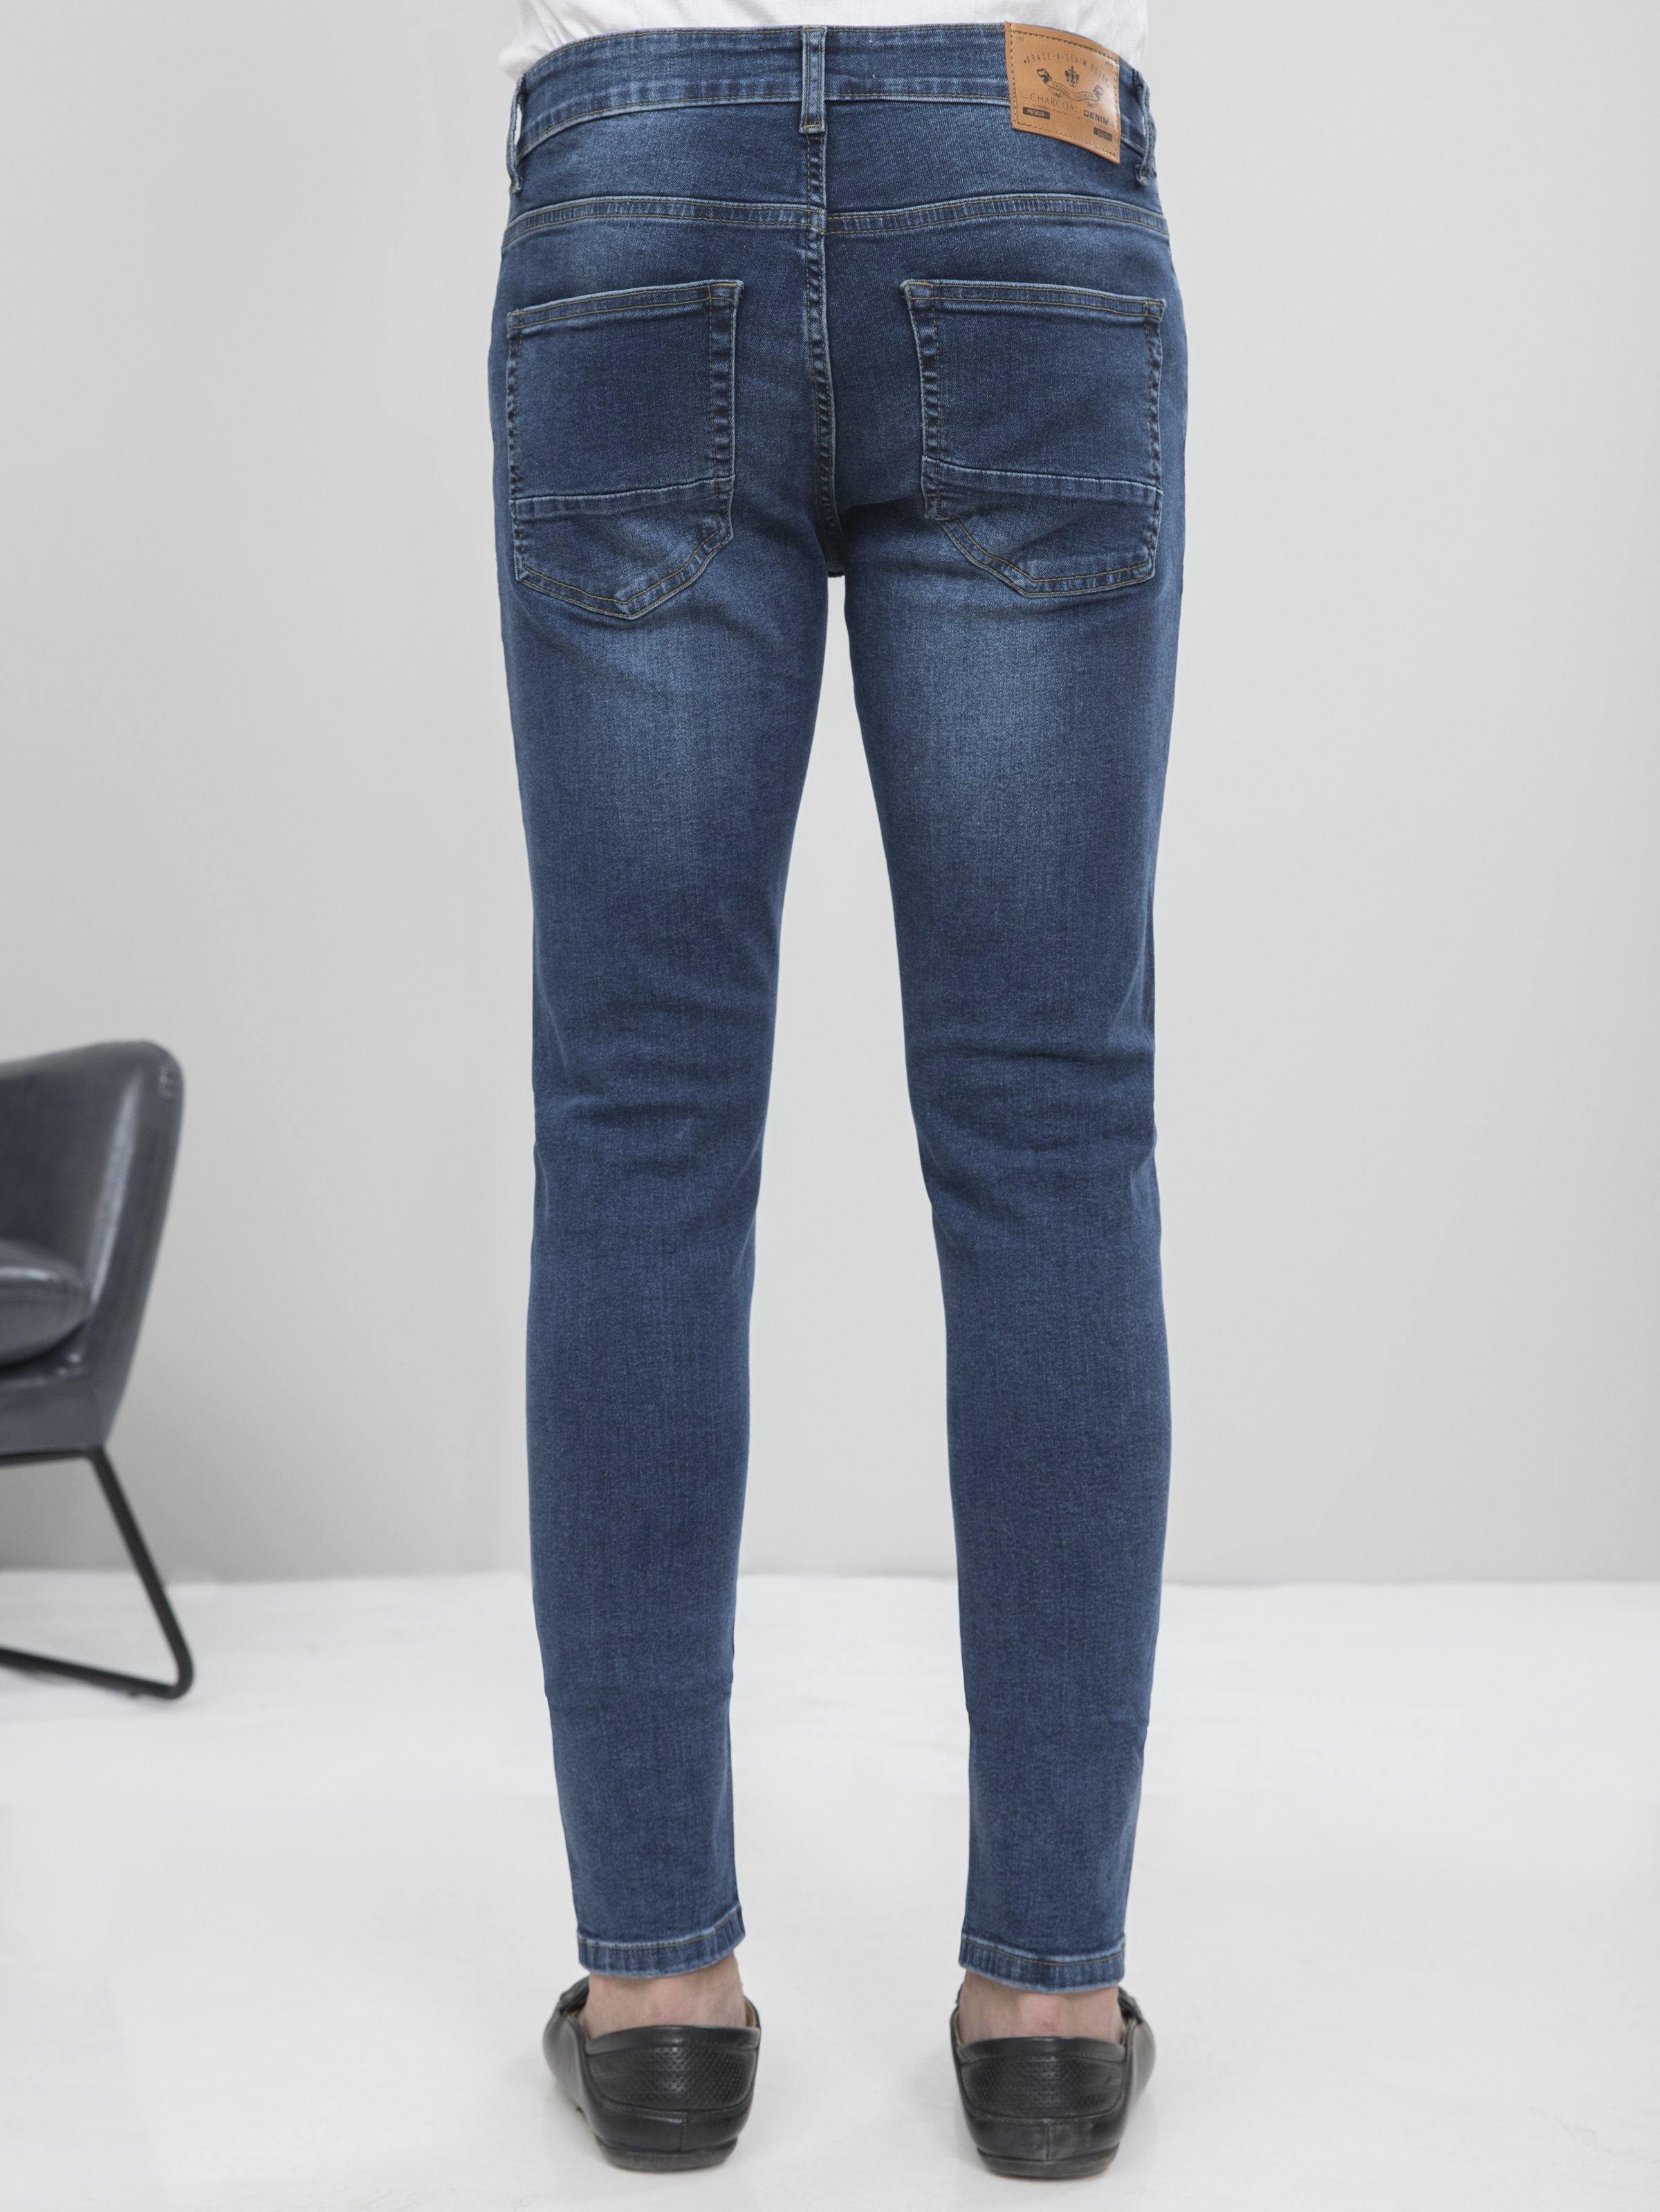 DENIM SLIM FIT JEANS at Charcoal Clothing